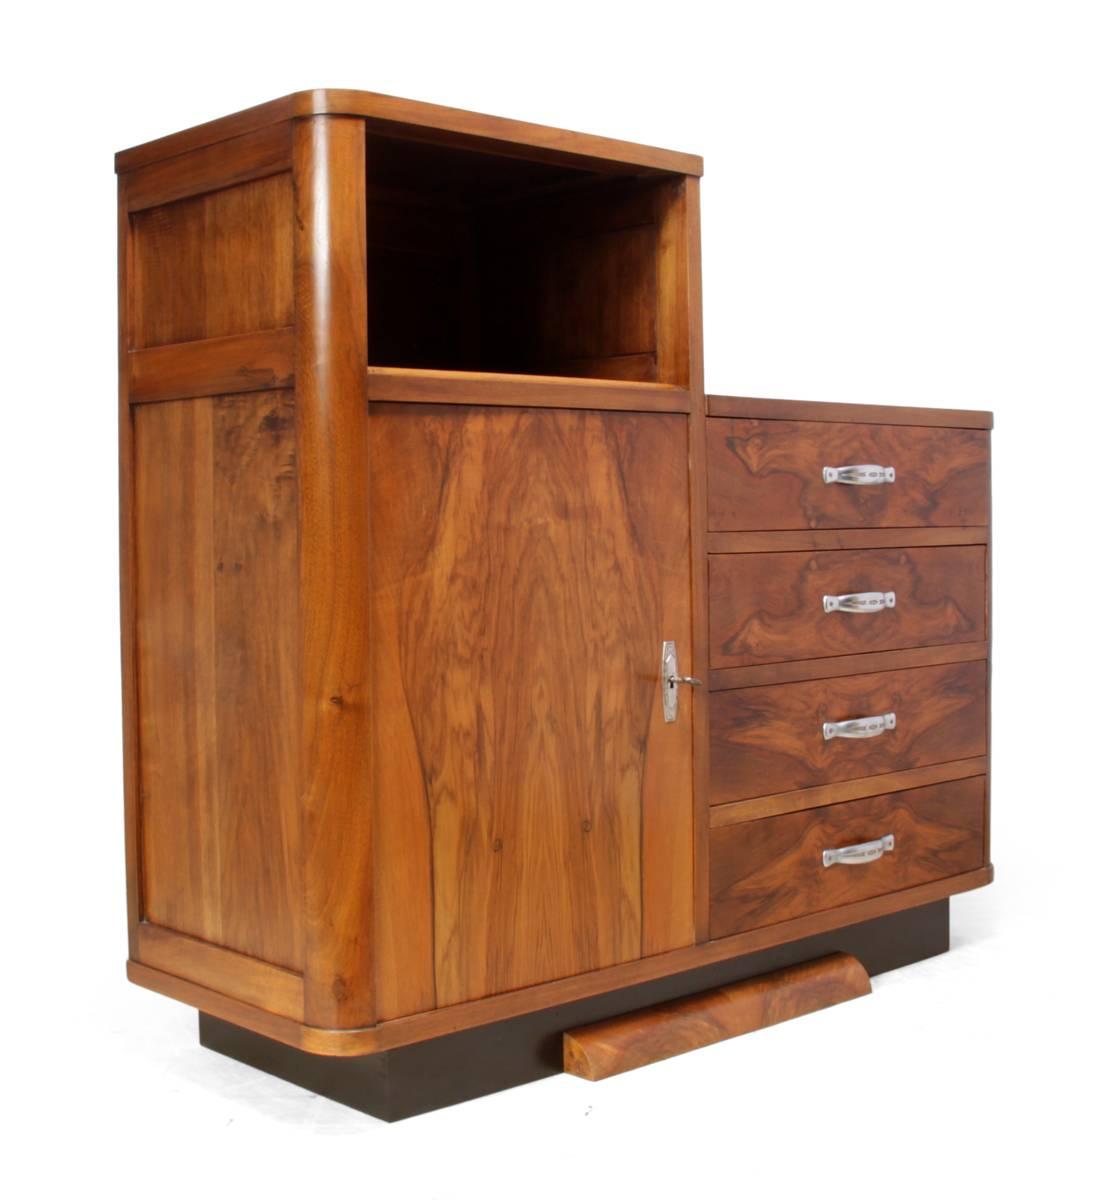 Art Deco walnut cabinet, circa 1930
This Art Deco chest has four drawers and a cupboard with adjustable shelves behind, produced in France in the 1930s with dovetail joint construction. This walnut cabinet has been professionally restored and hand